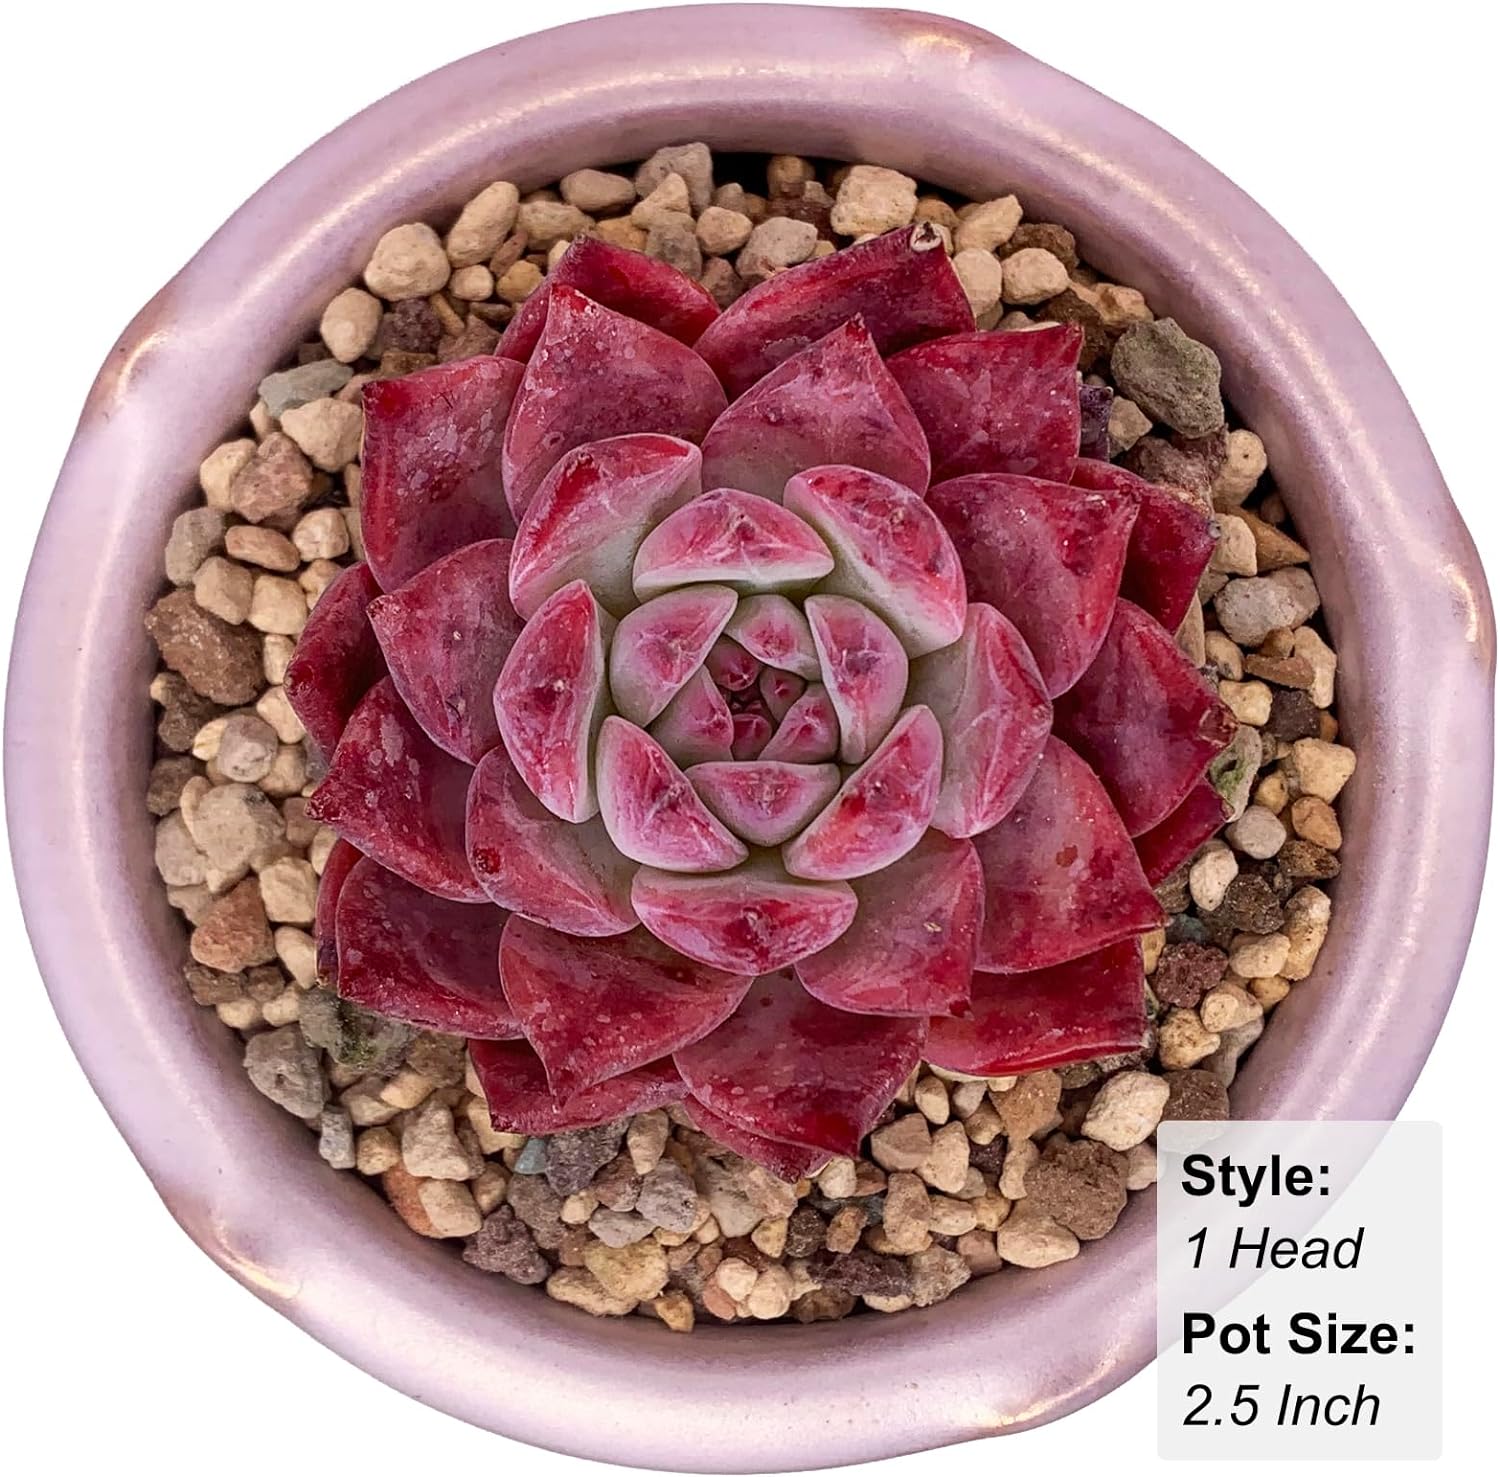 Echeveria Colorata Rare Live Succulent Plants, Red 2.5" Live Plant, Package Without Pot Soil, Garden Indoor Office Desk, Wedding Party Baby Shower Decoration, Friend Plant Lovers Gifts